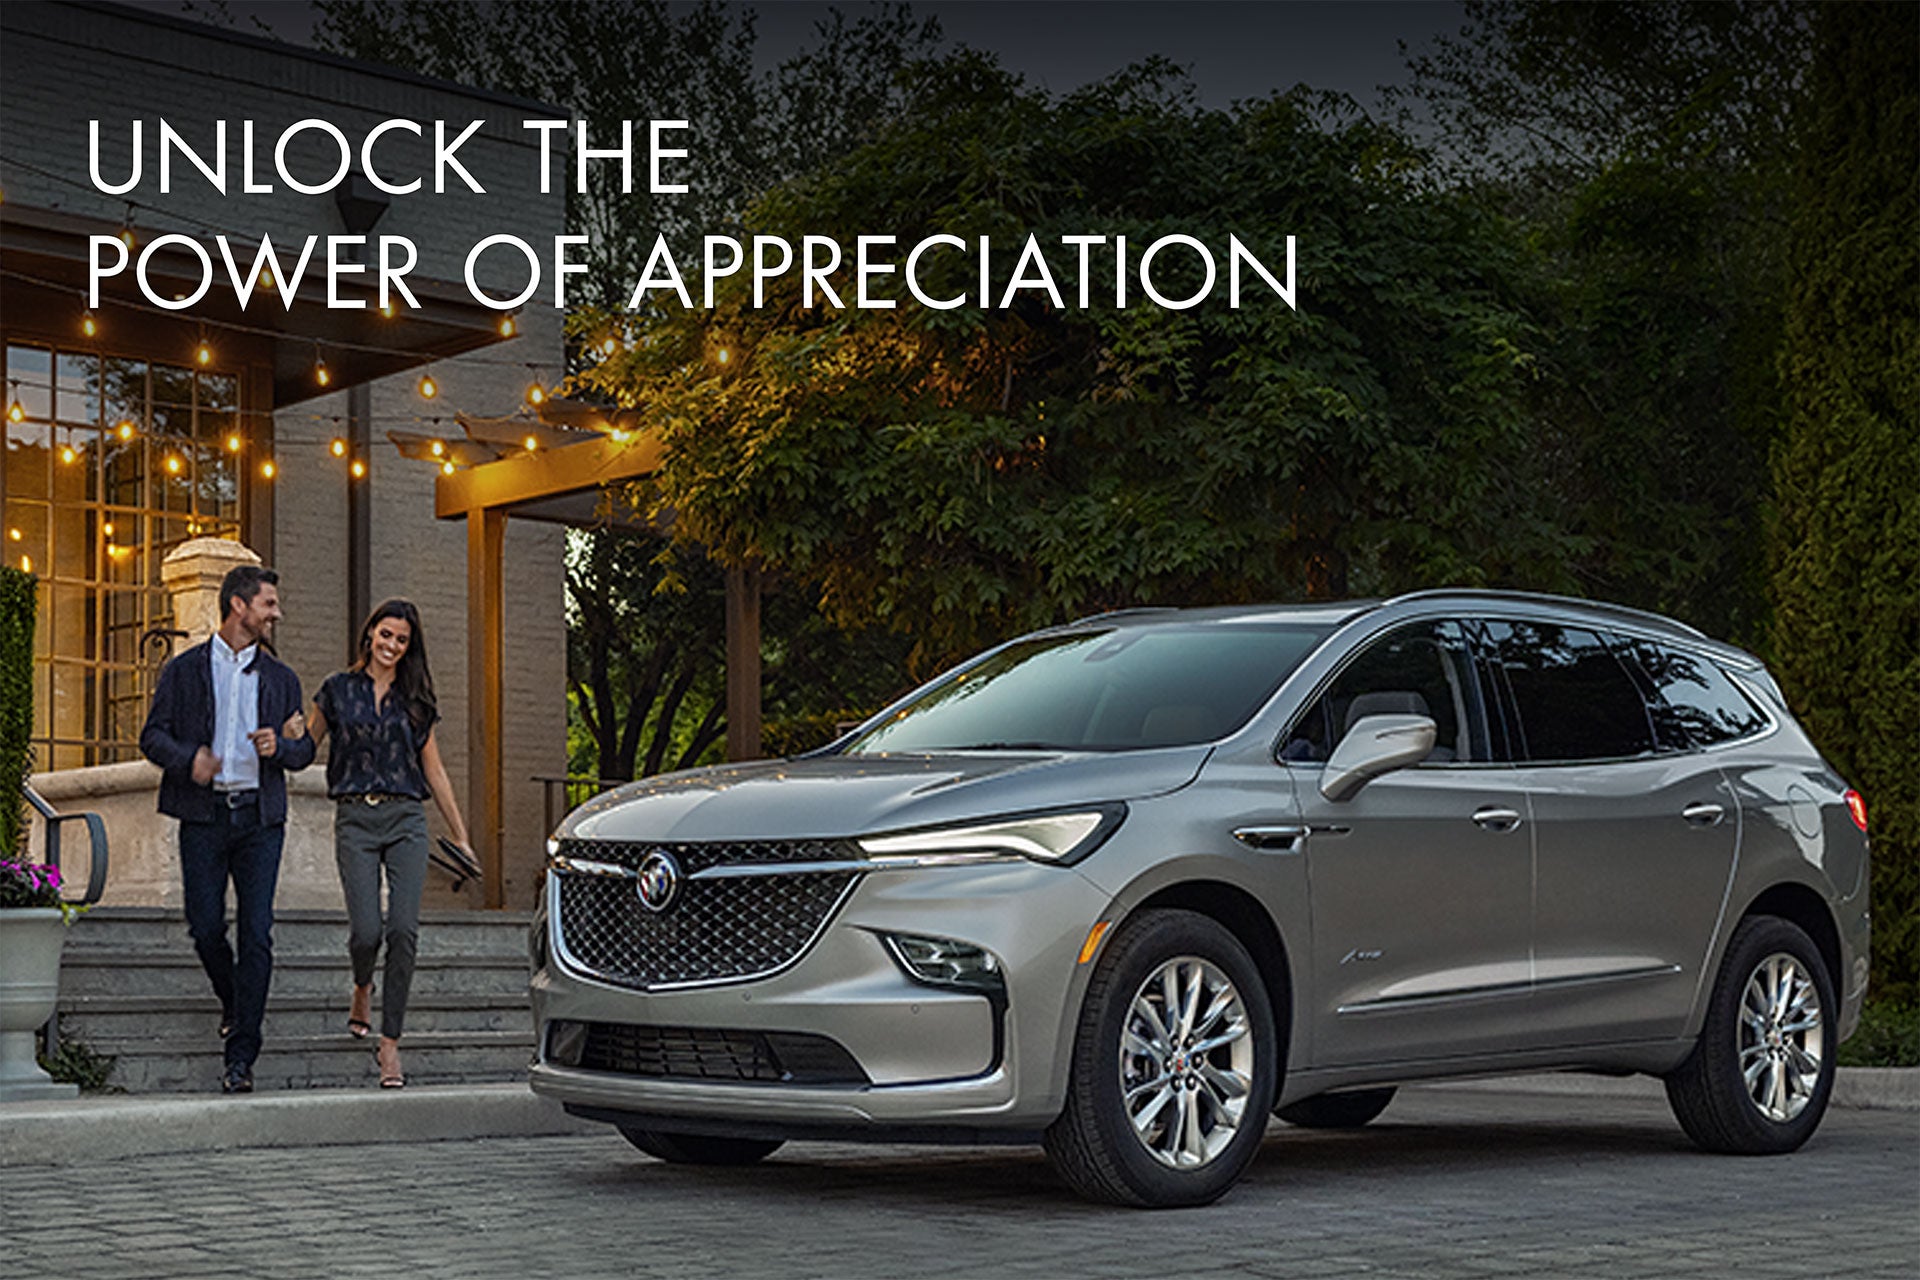 Unlock the power of appreciation | Fred Anderson Chevrolet Buick GMC in Greer SC